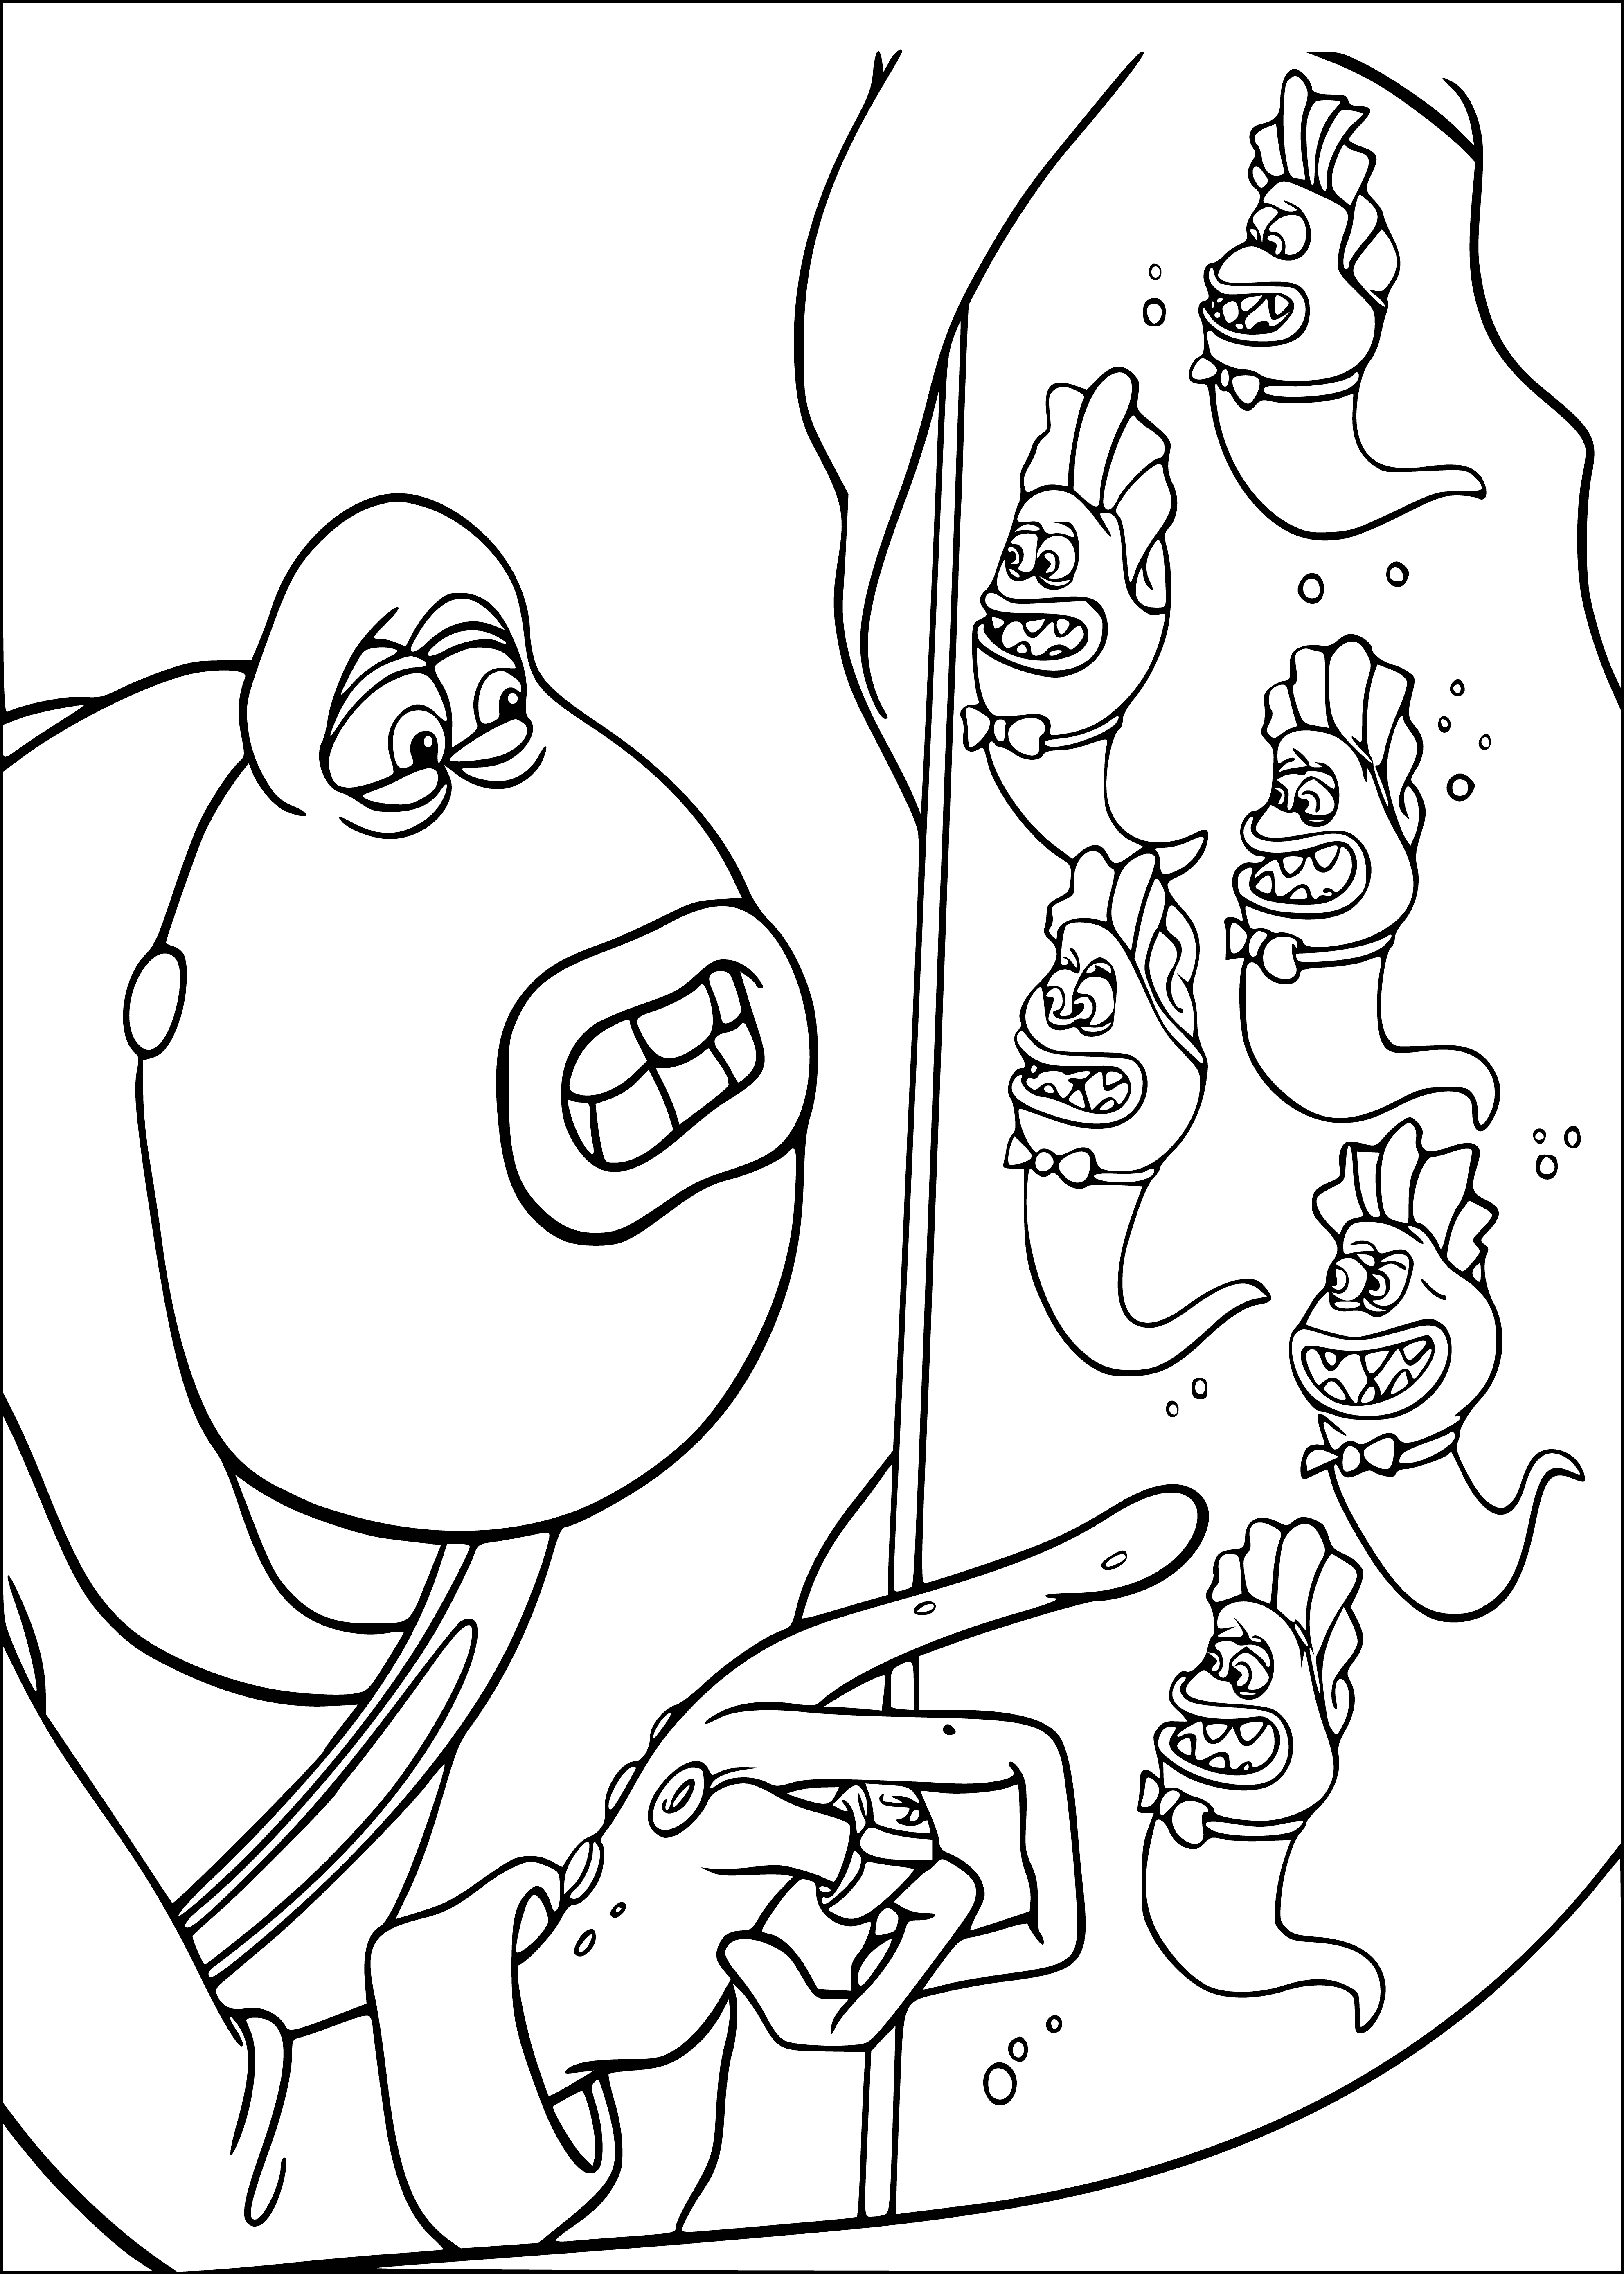 coloring page: Toad proudly holds two tadpoles, one green and one brown, in his hands.